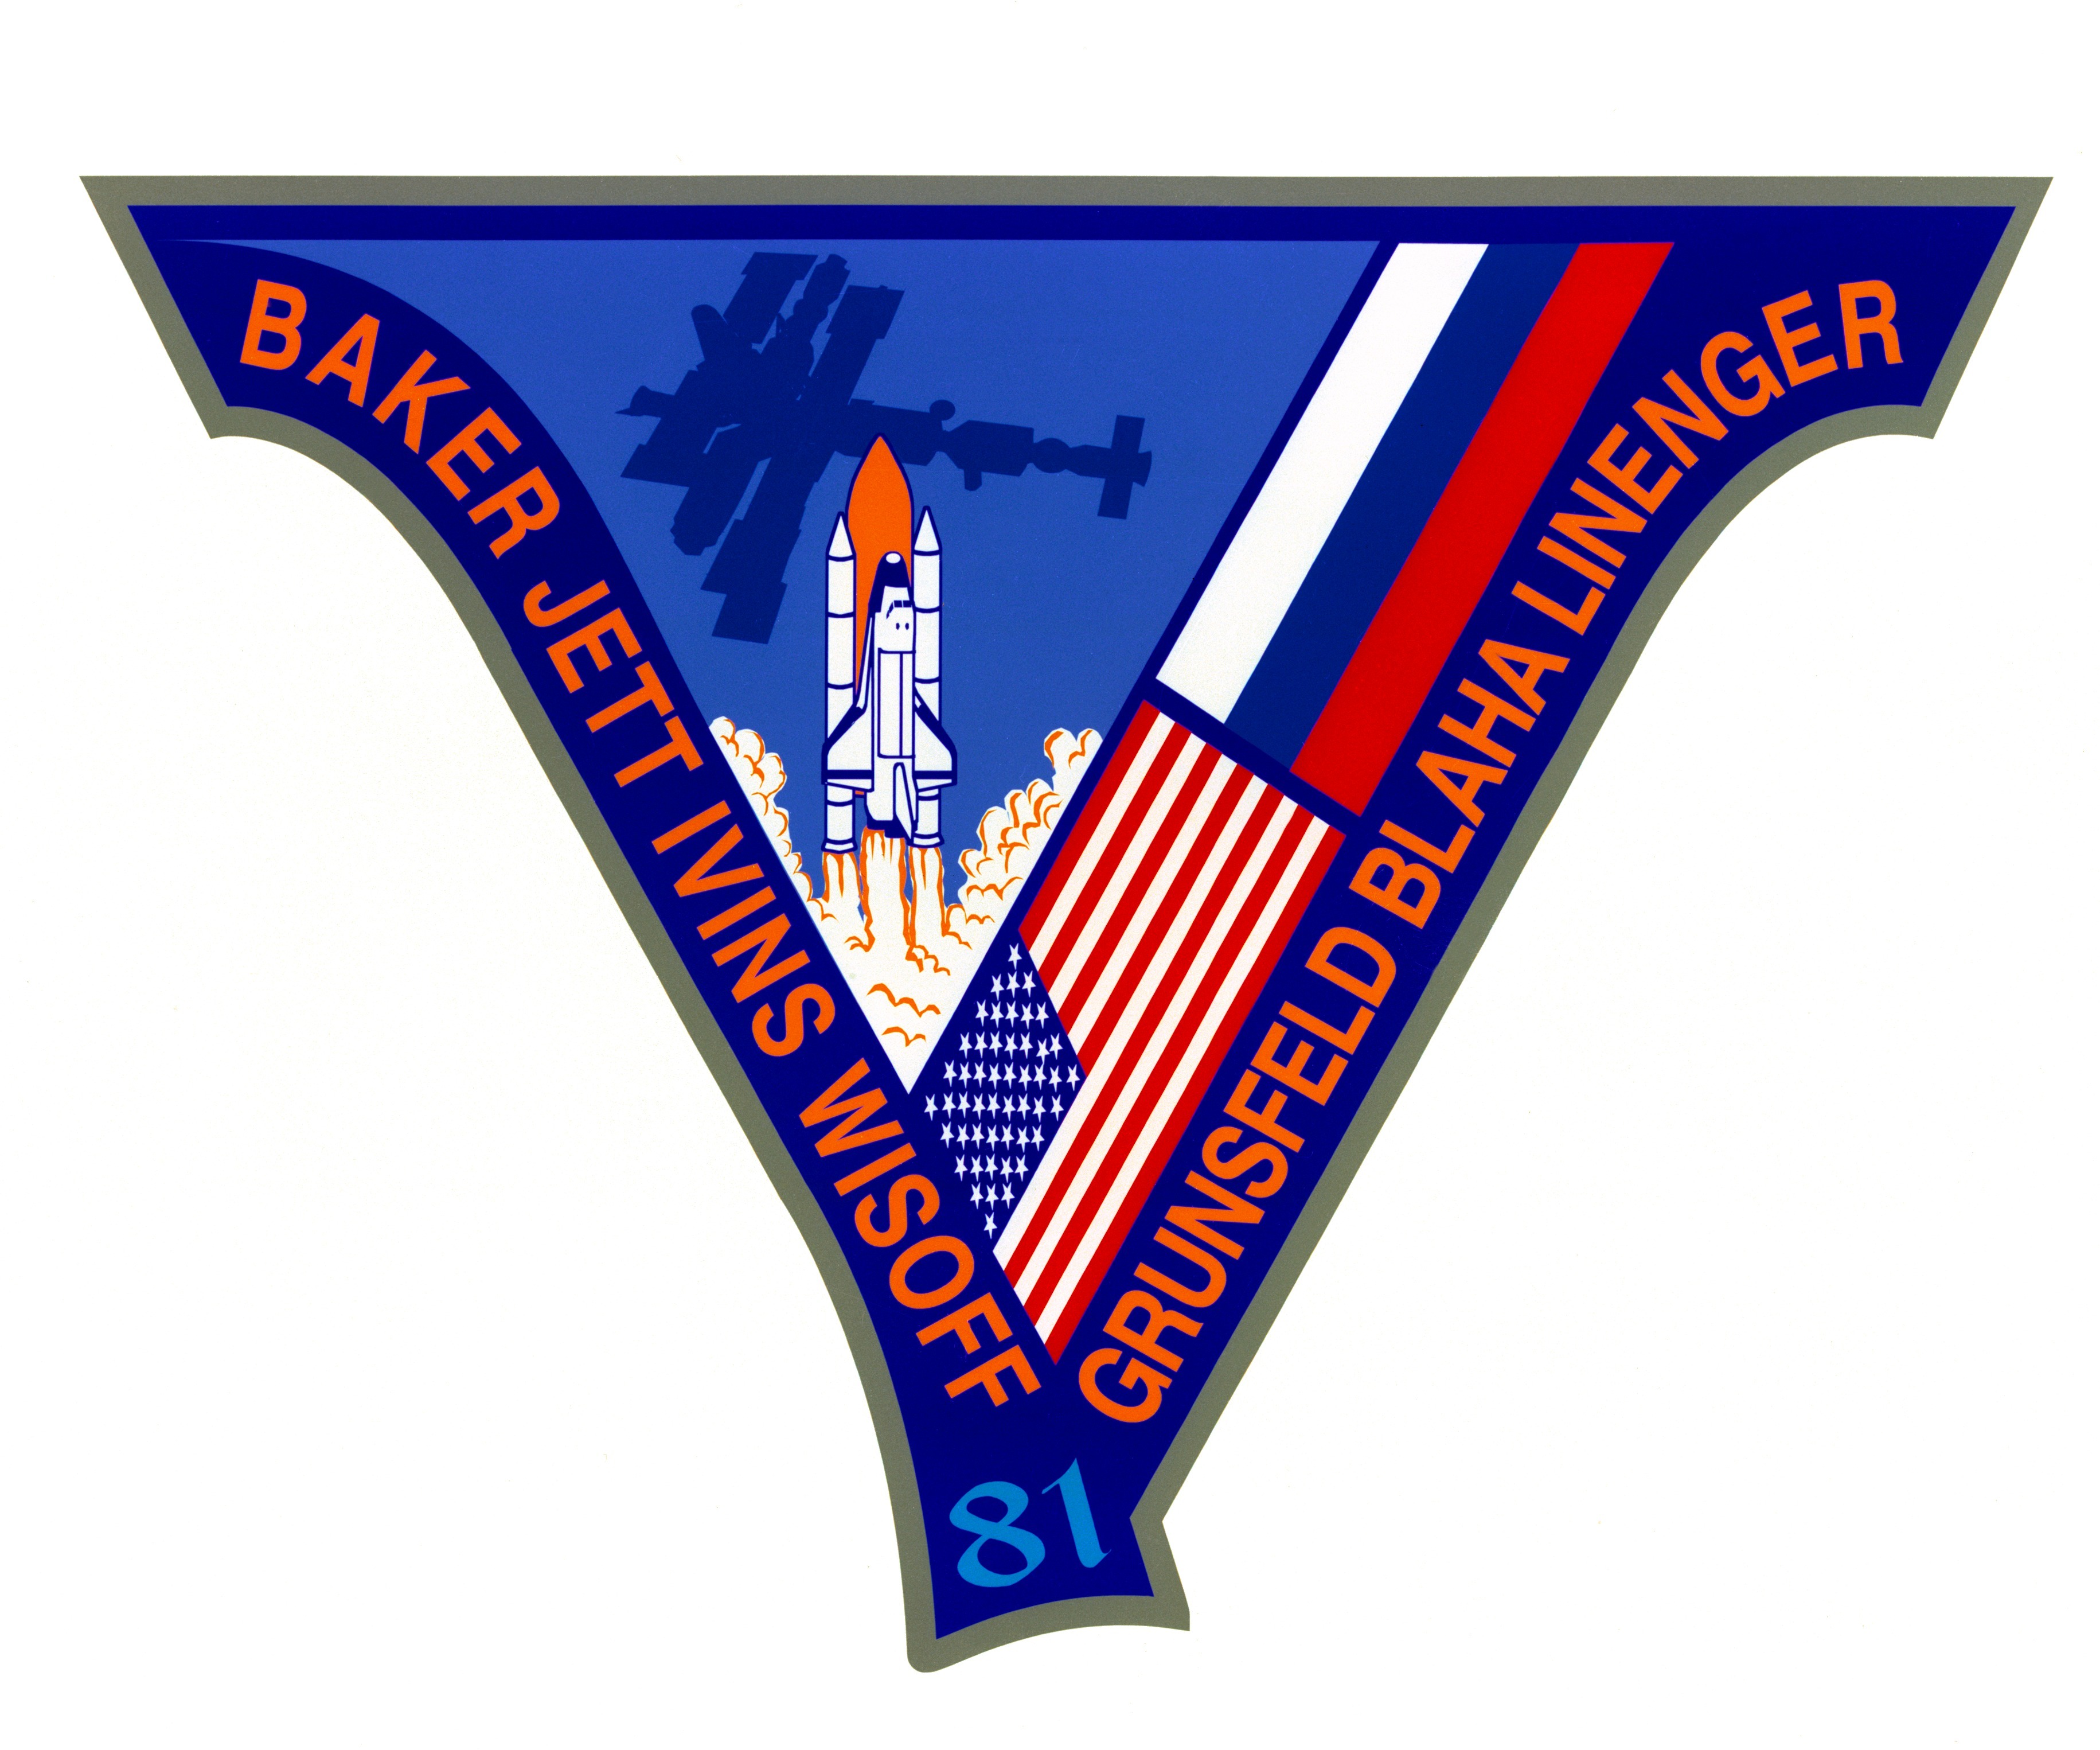 The STS-81 crew patch